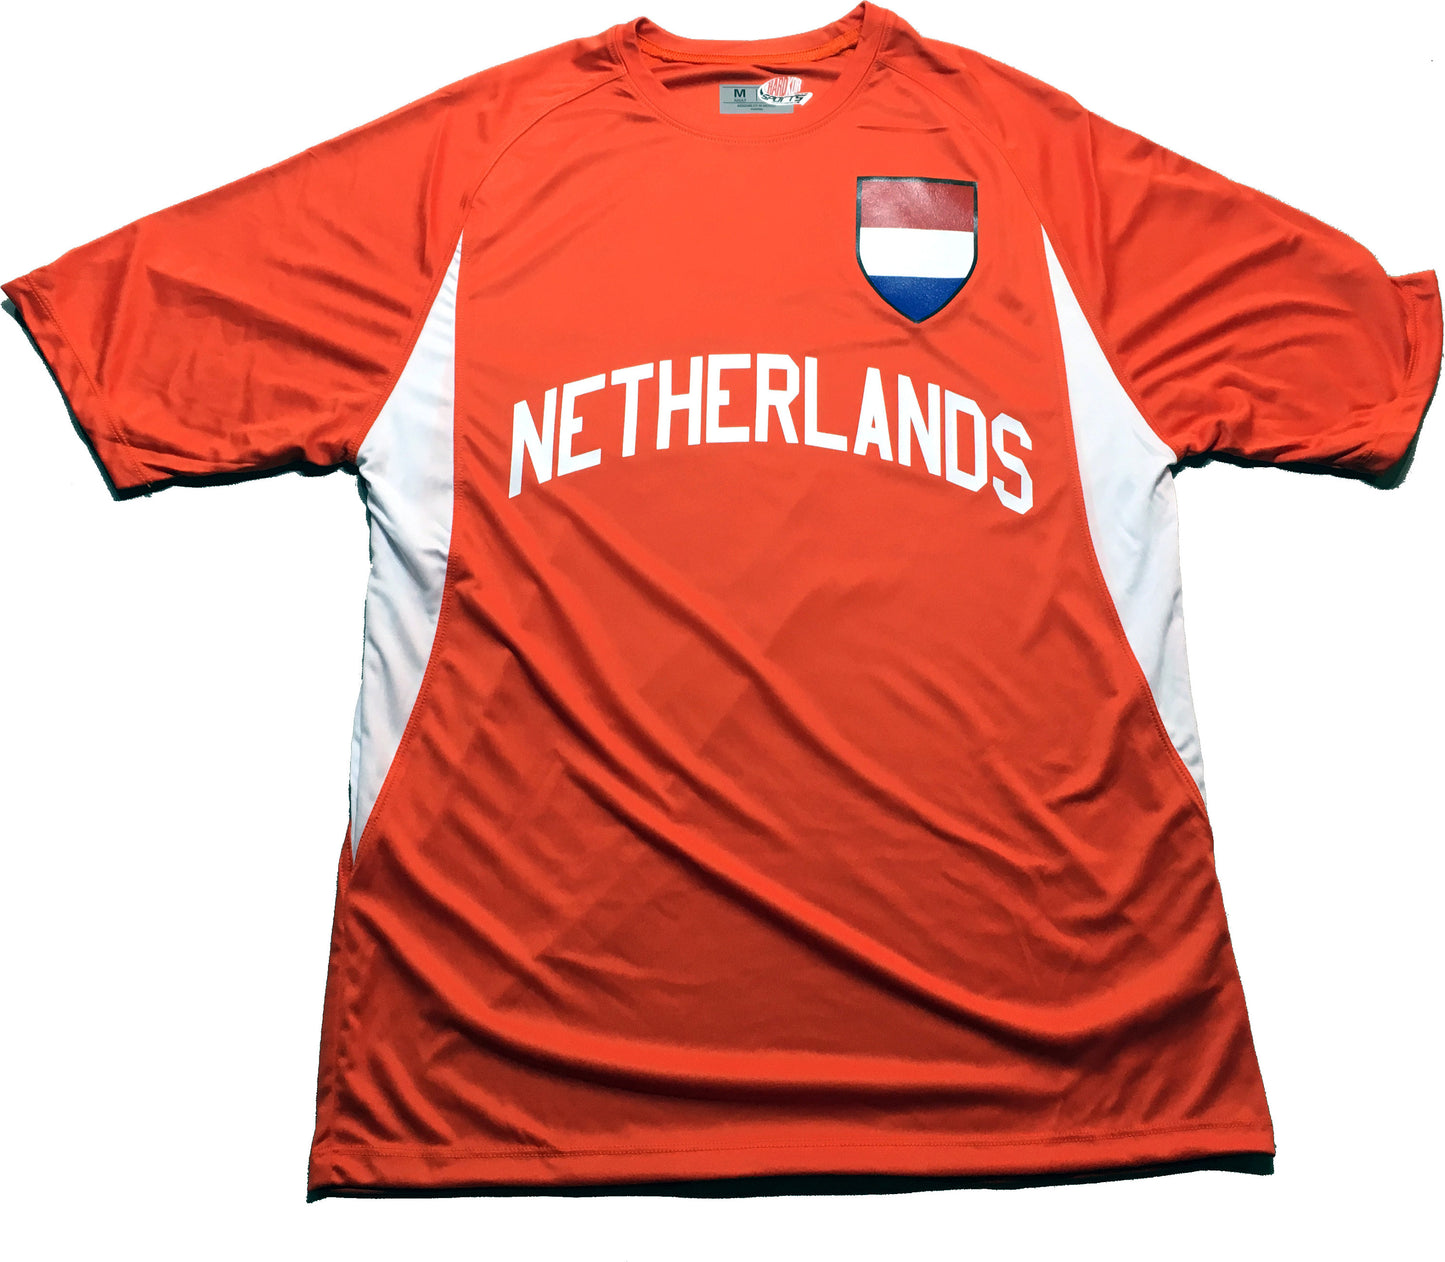 Netherlands Soccer Jersey Shield Design Personalized with Your Names and Numbers in Your choice of Popular Colors